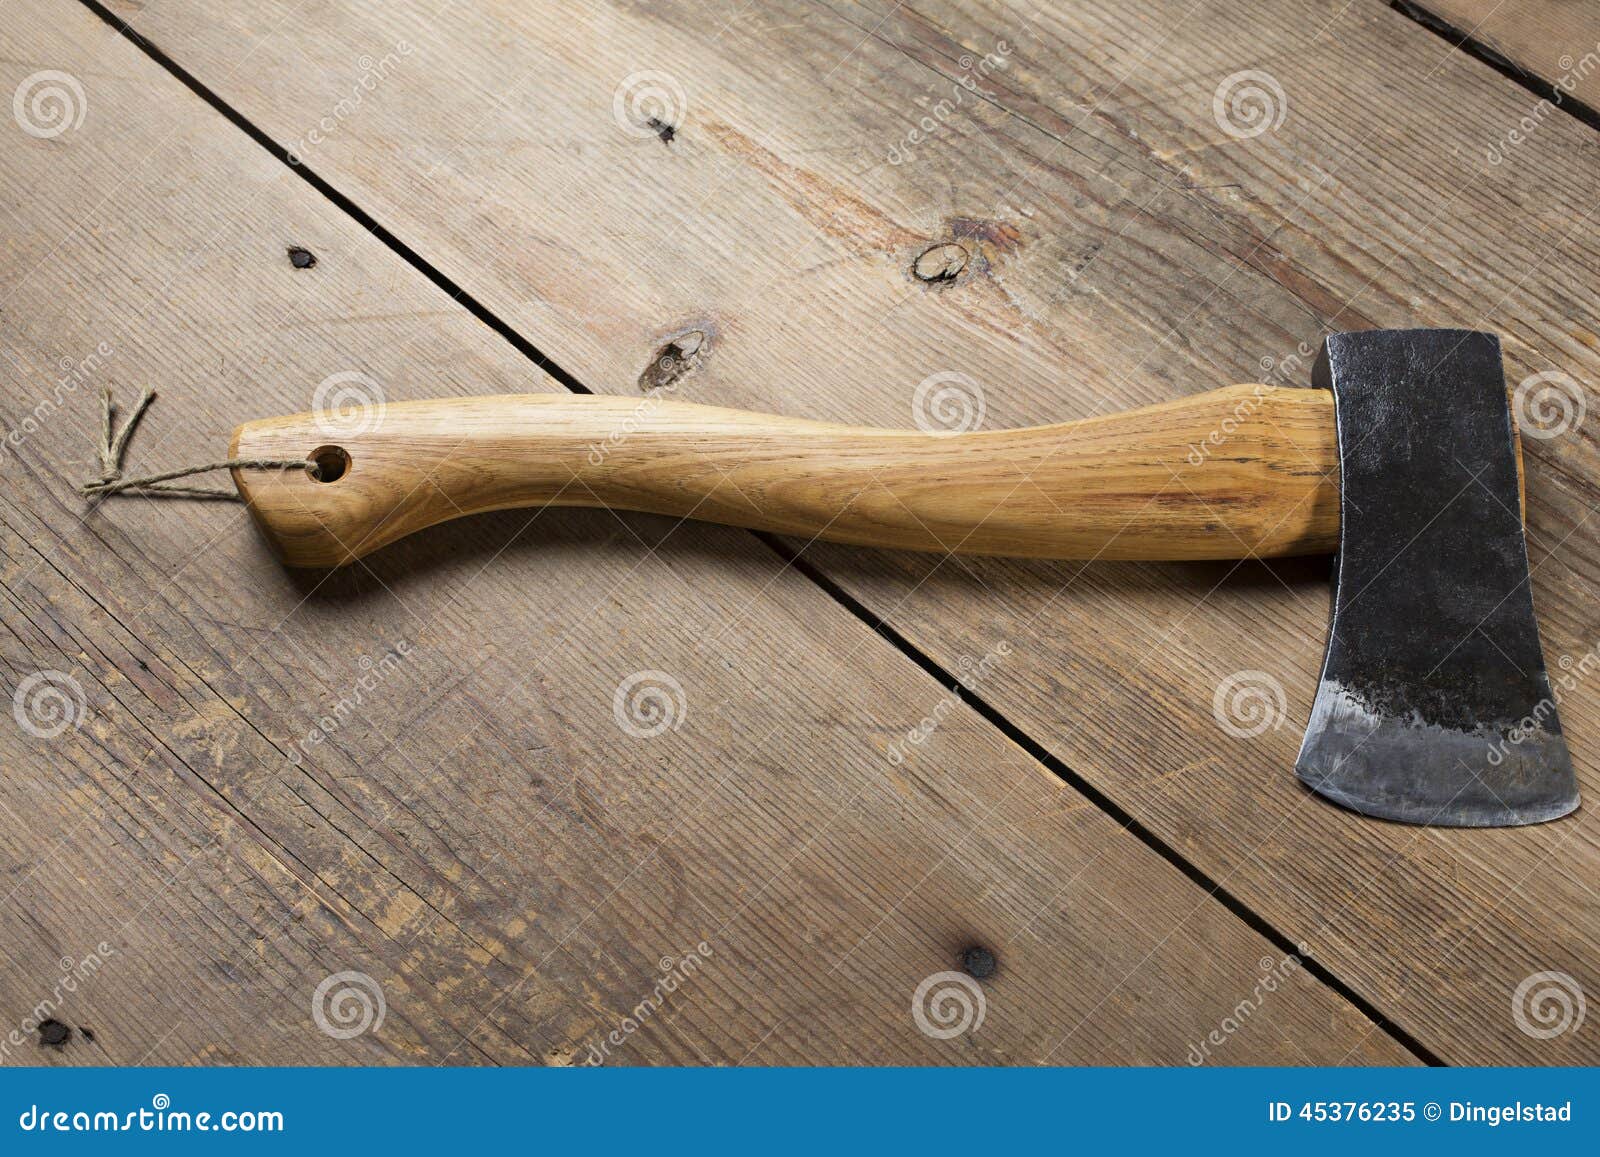 gradually Hiring Diplomat Axe on a table stock image. Image of object, craft, strong - 45376235